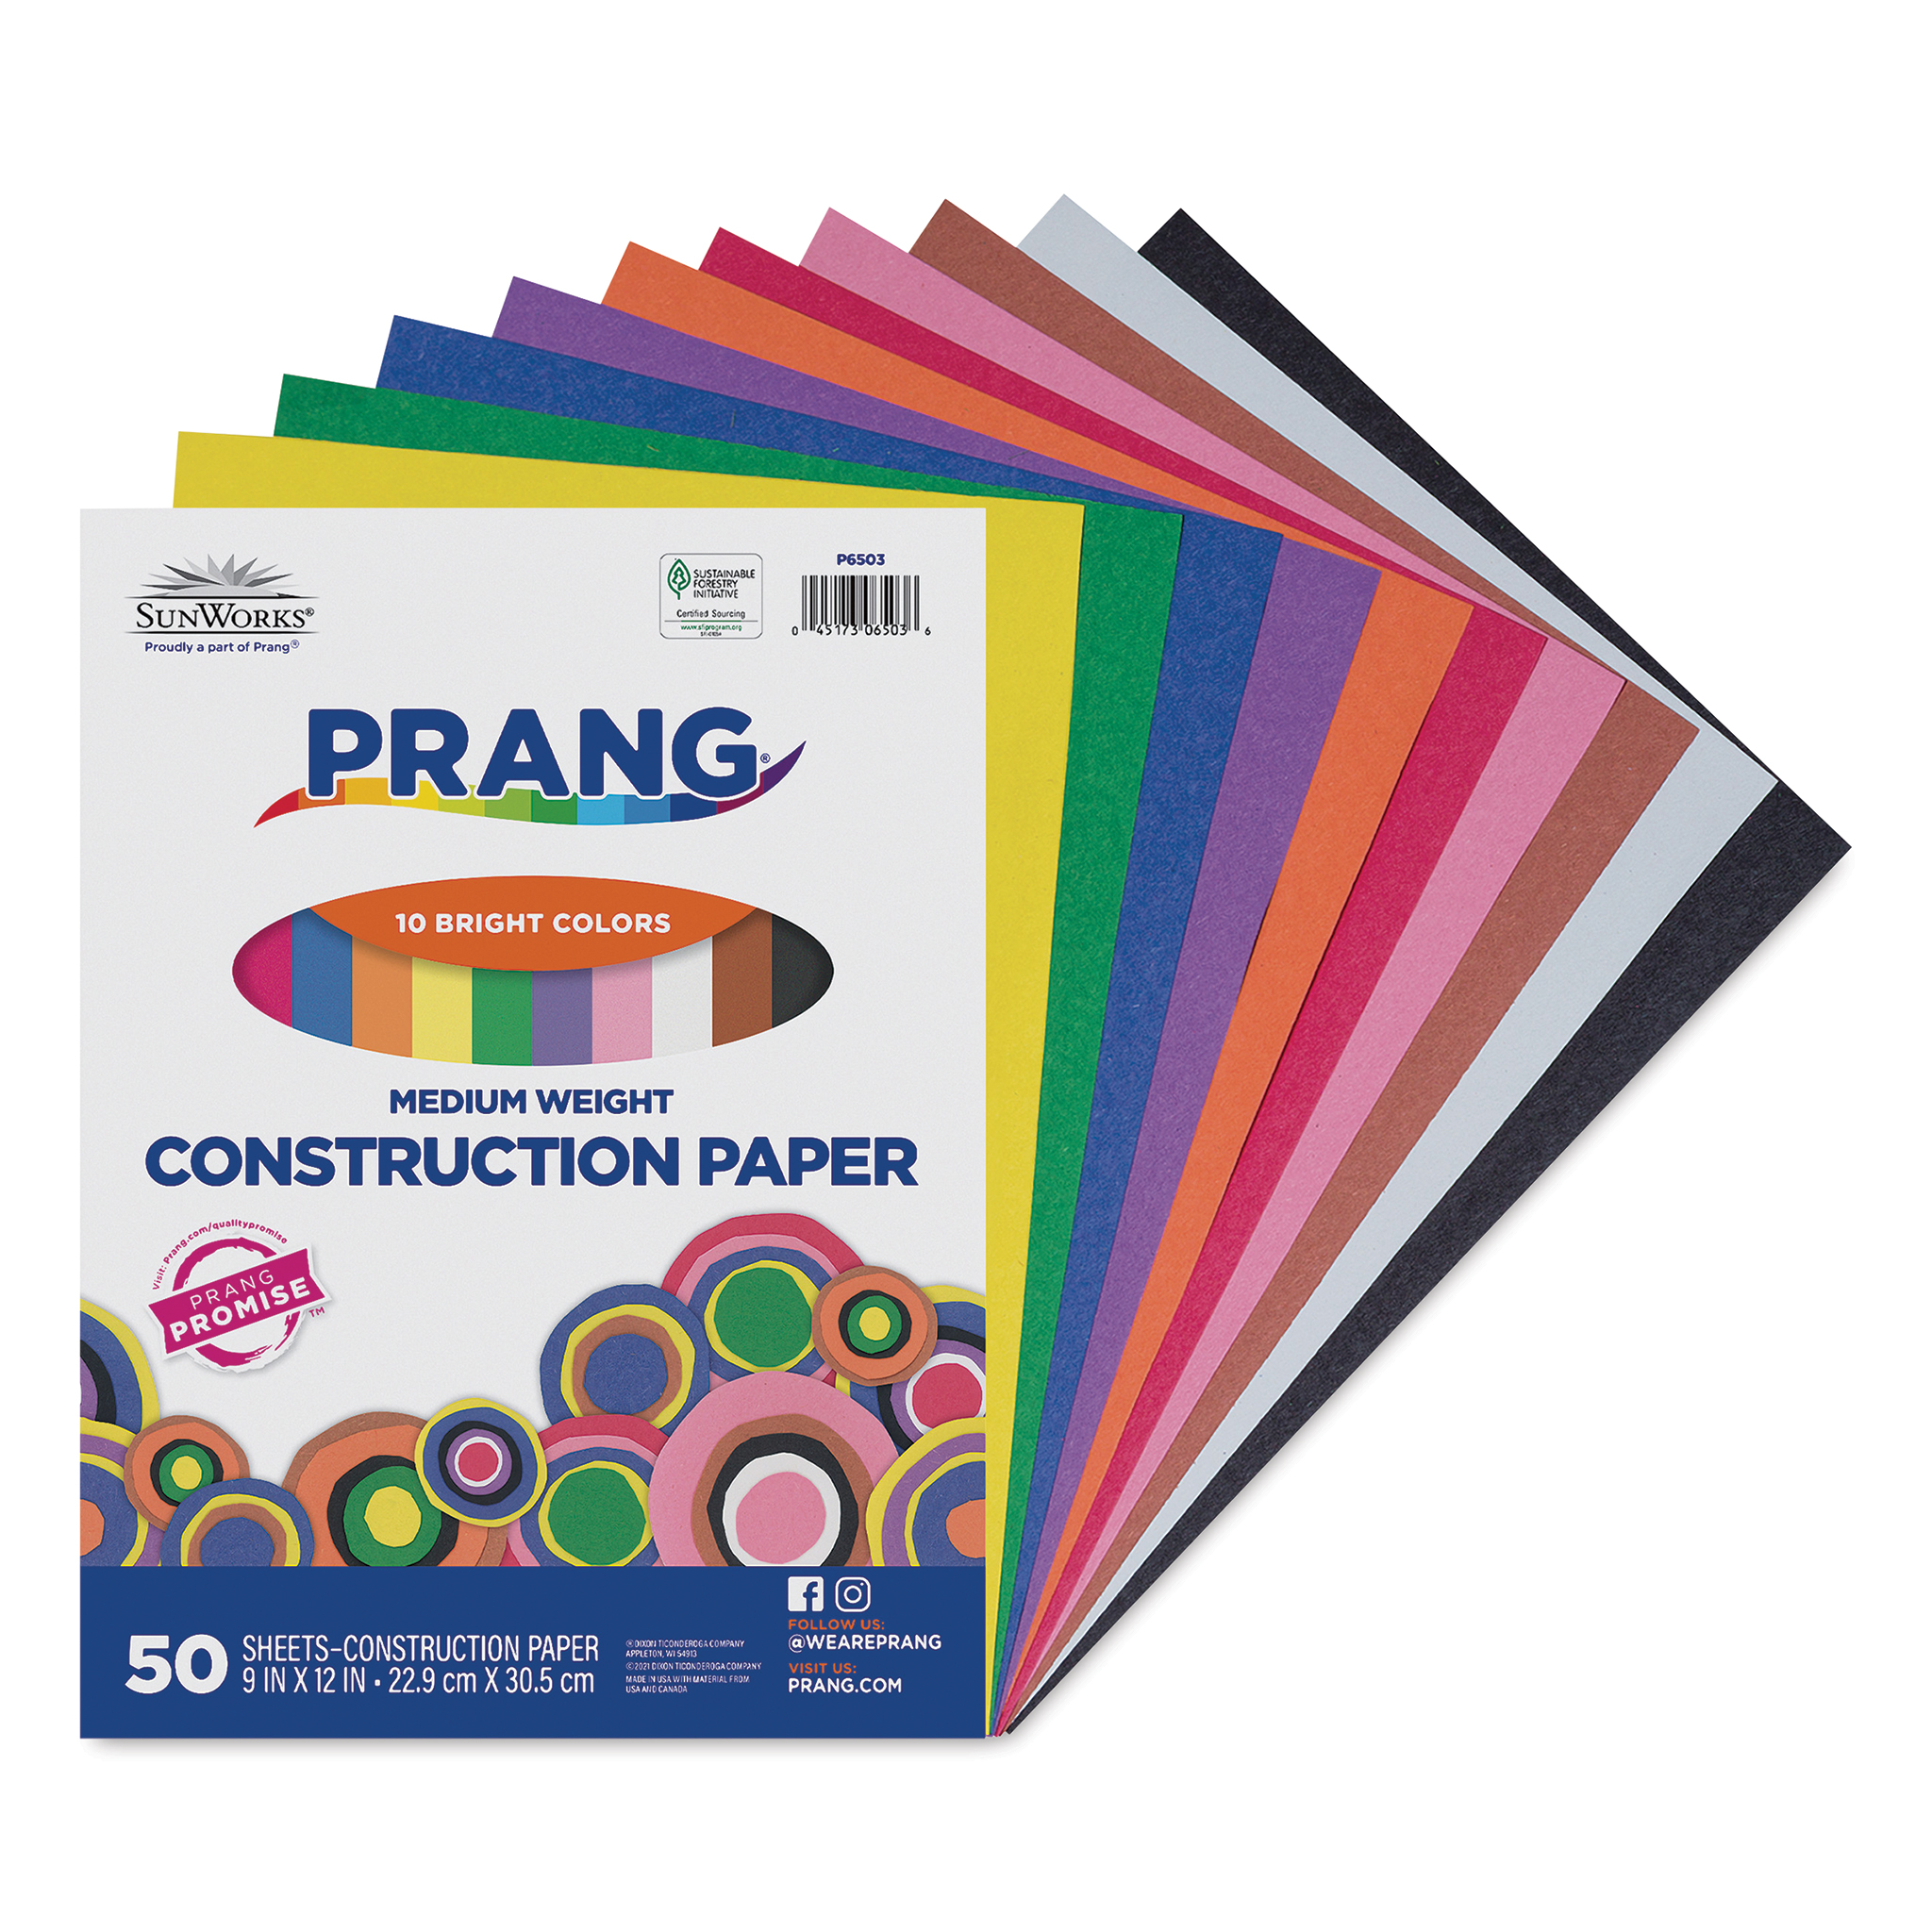 Neon Construction Paper - Classroom Papers - Paper - The Craft Shop, Inc.